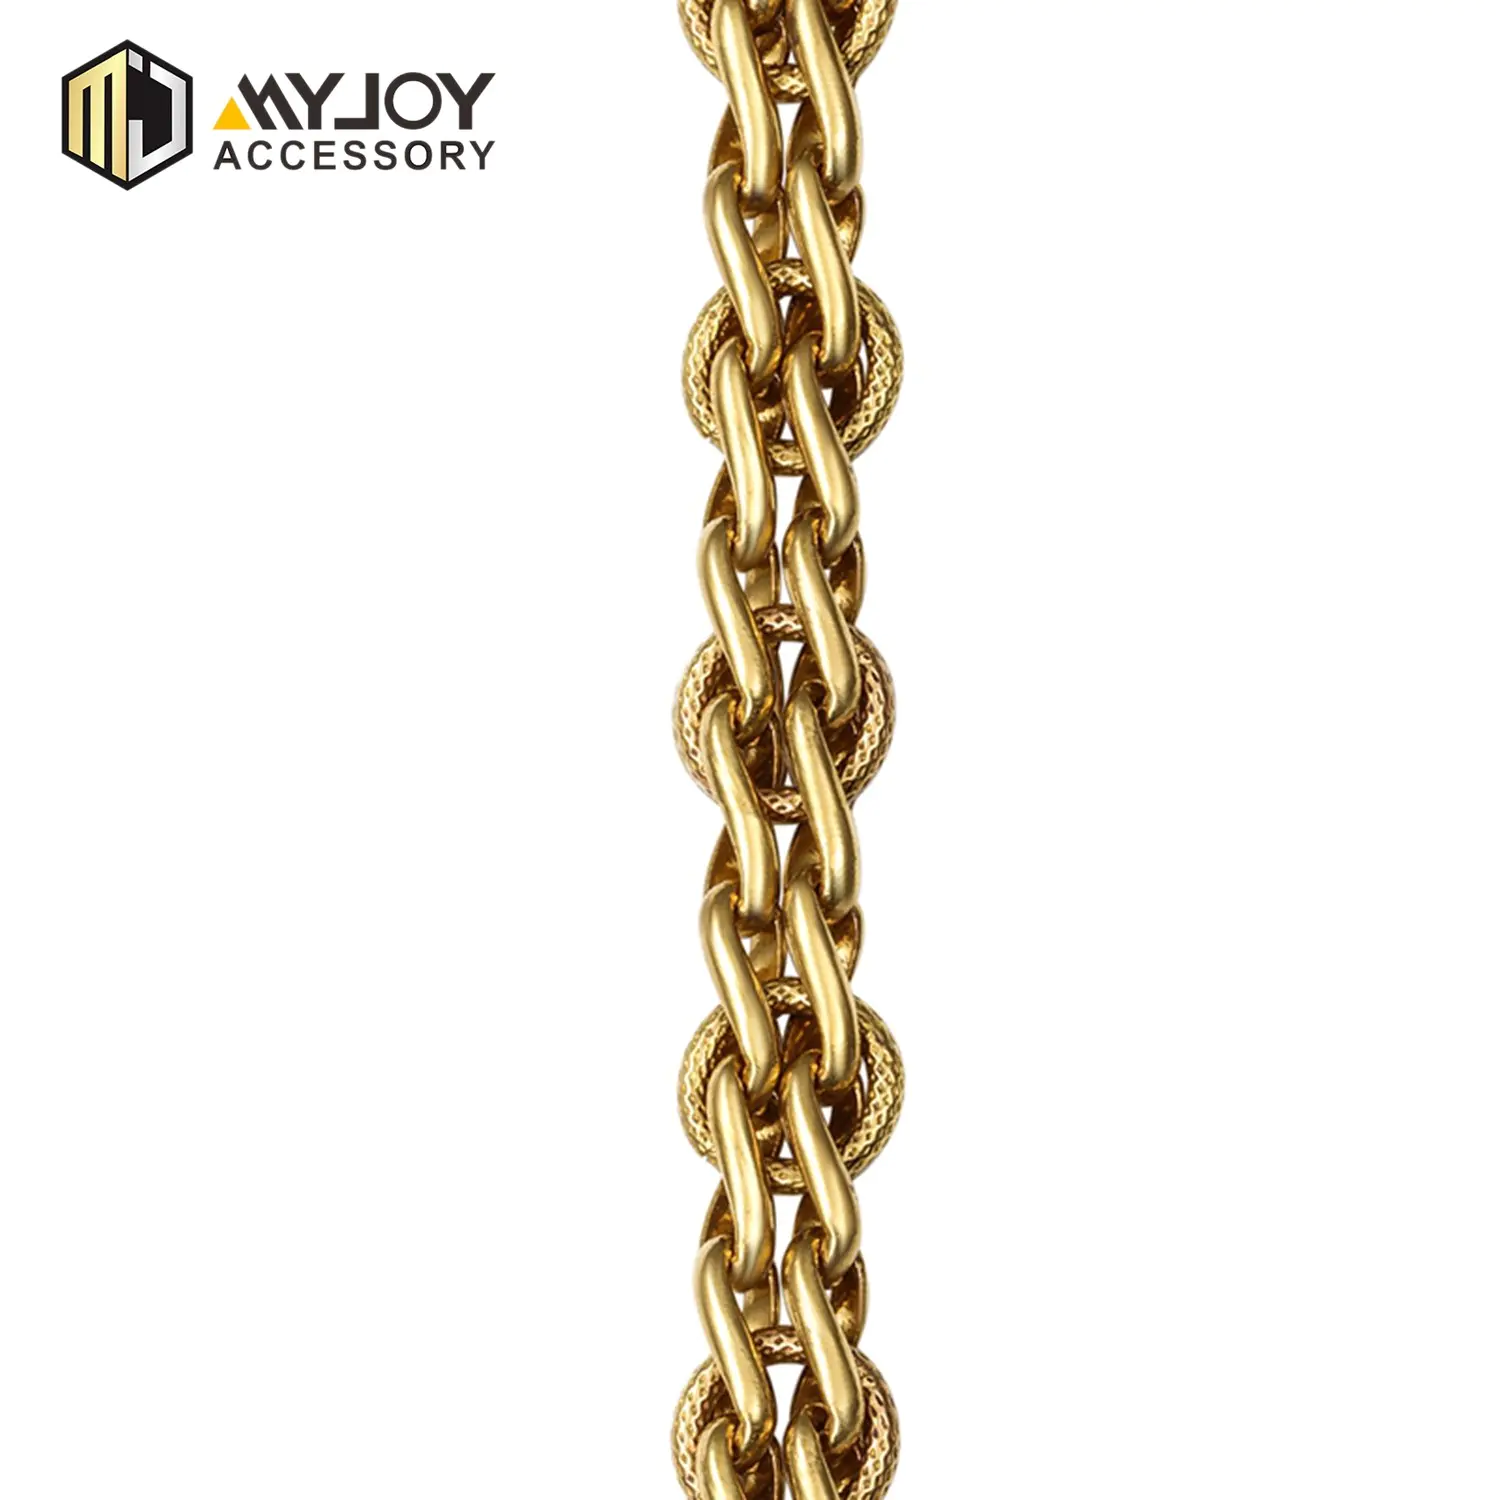 MYJOY chains bag chain for business for bags